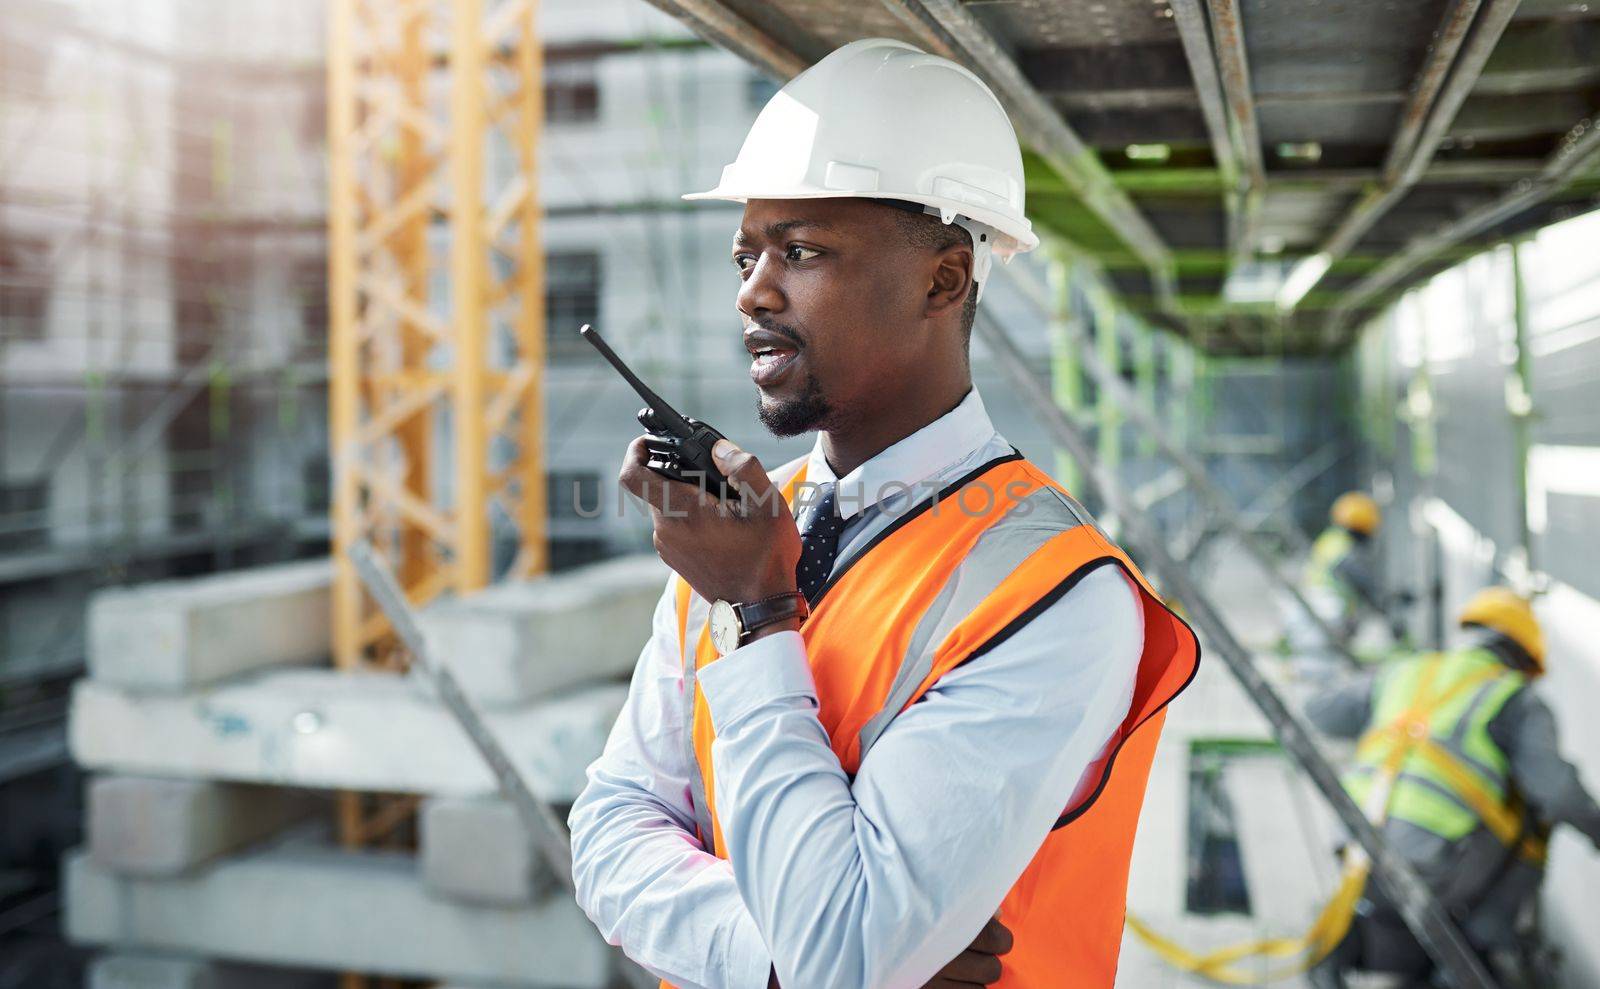 Effective communication for better construction. a young man using a walkie talkie while working at a construction site